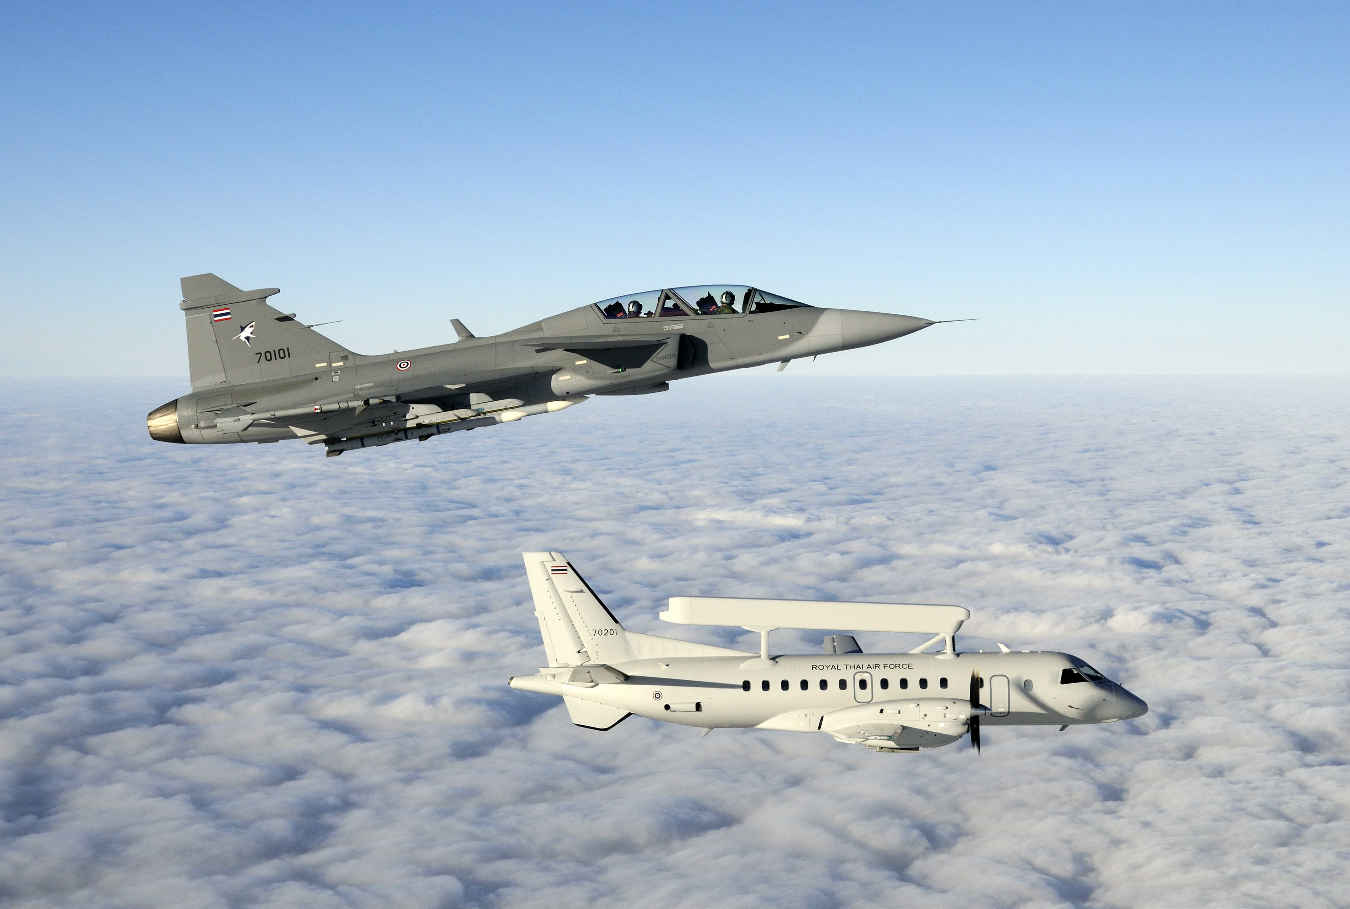 Saab to upgrade Thai Air Command and Control